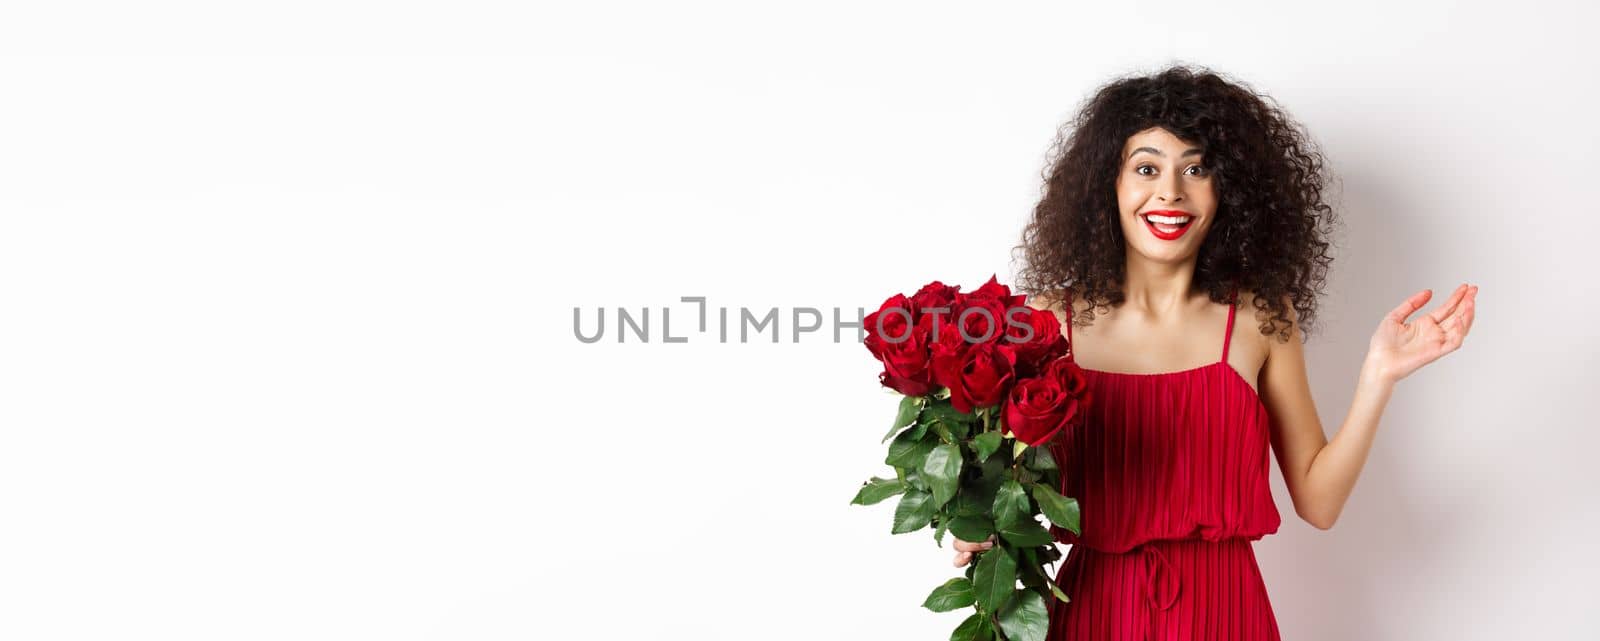 Romance and Valentines day. Woman gasping surprised and happy, receive surprise gift from lover, holding bouquet of red roses, standing on white background.